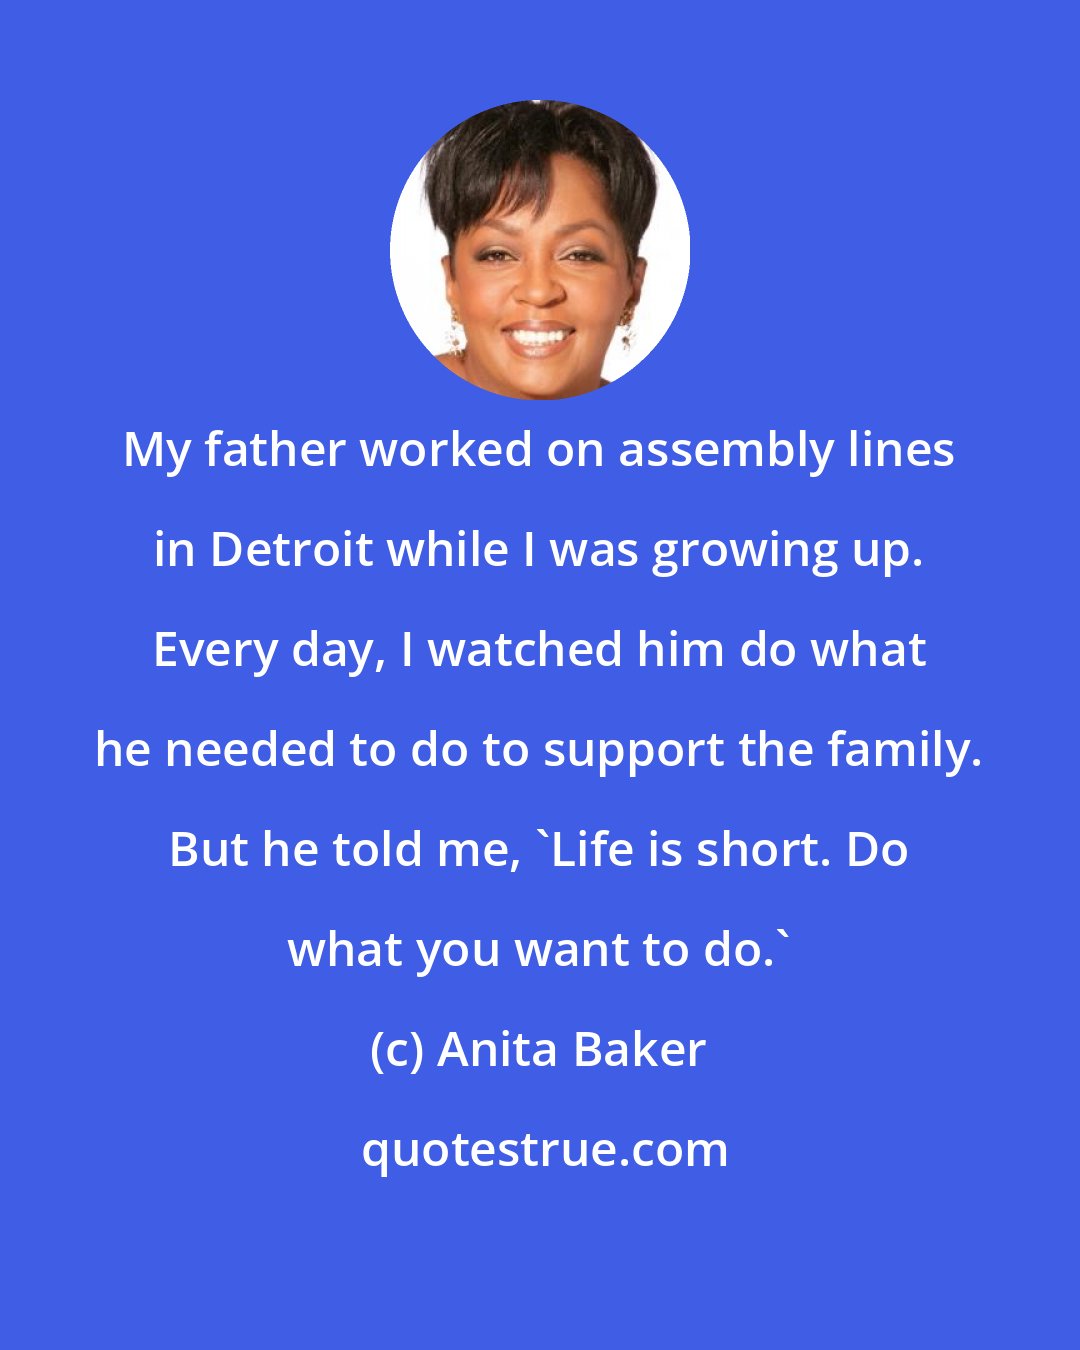 Anita Baker: My father worked on assembly lines in Detroit while I was growing up. Every day, I watched him do what he needed to do to support the family. But he told me, 'Life is short. Do what you want to do.'